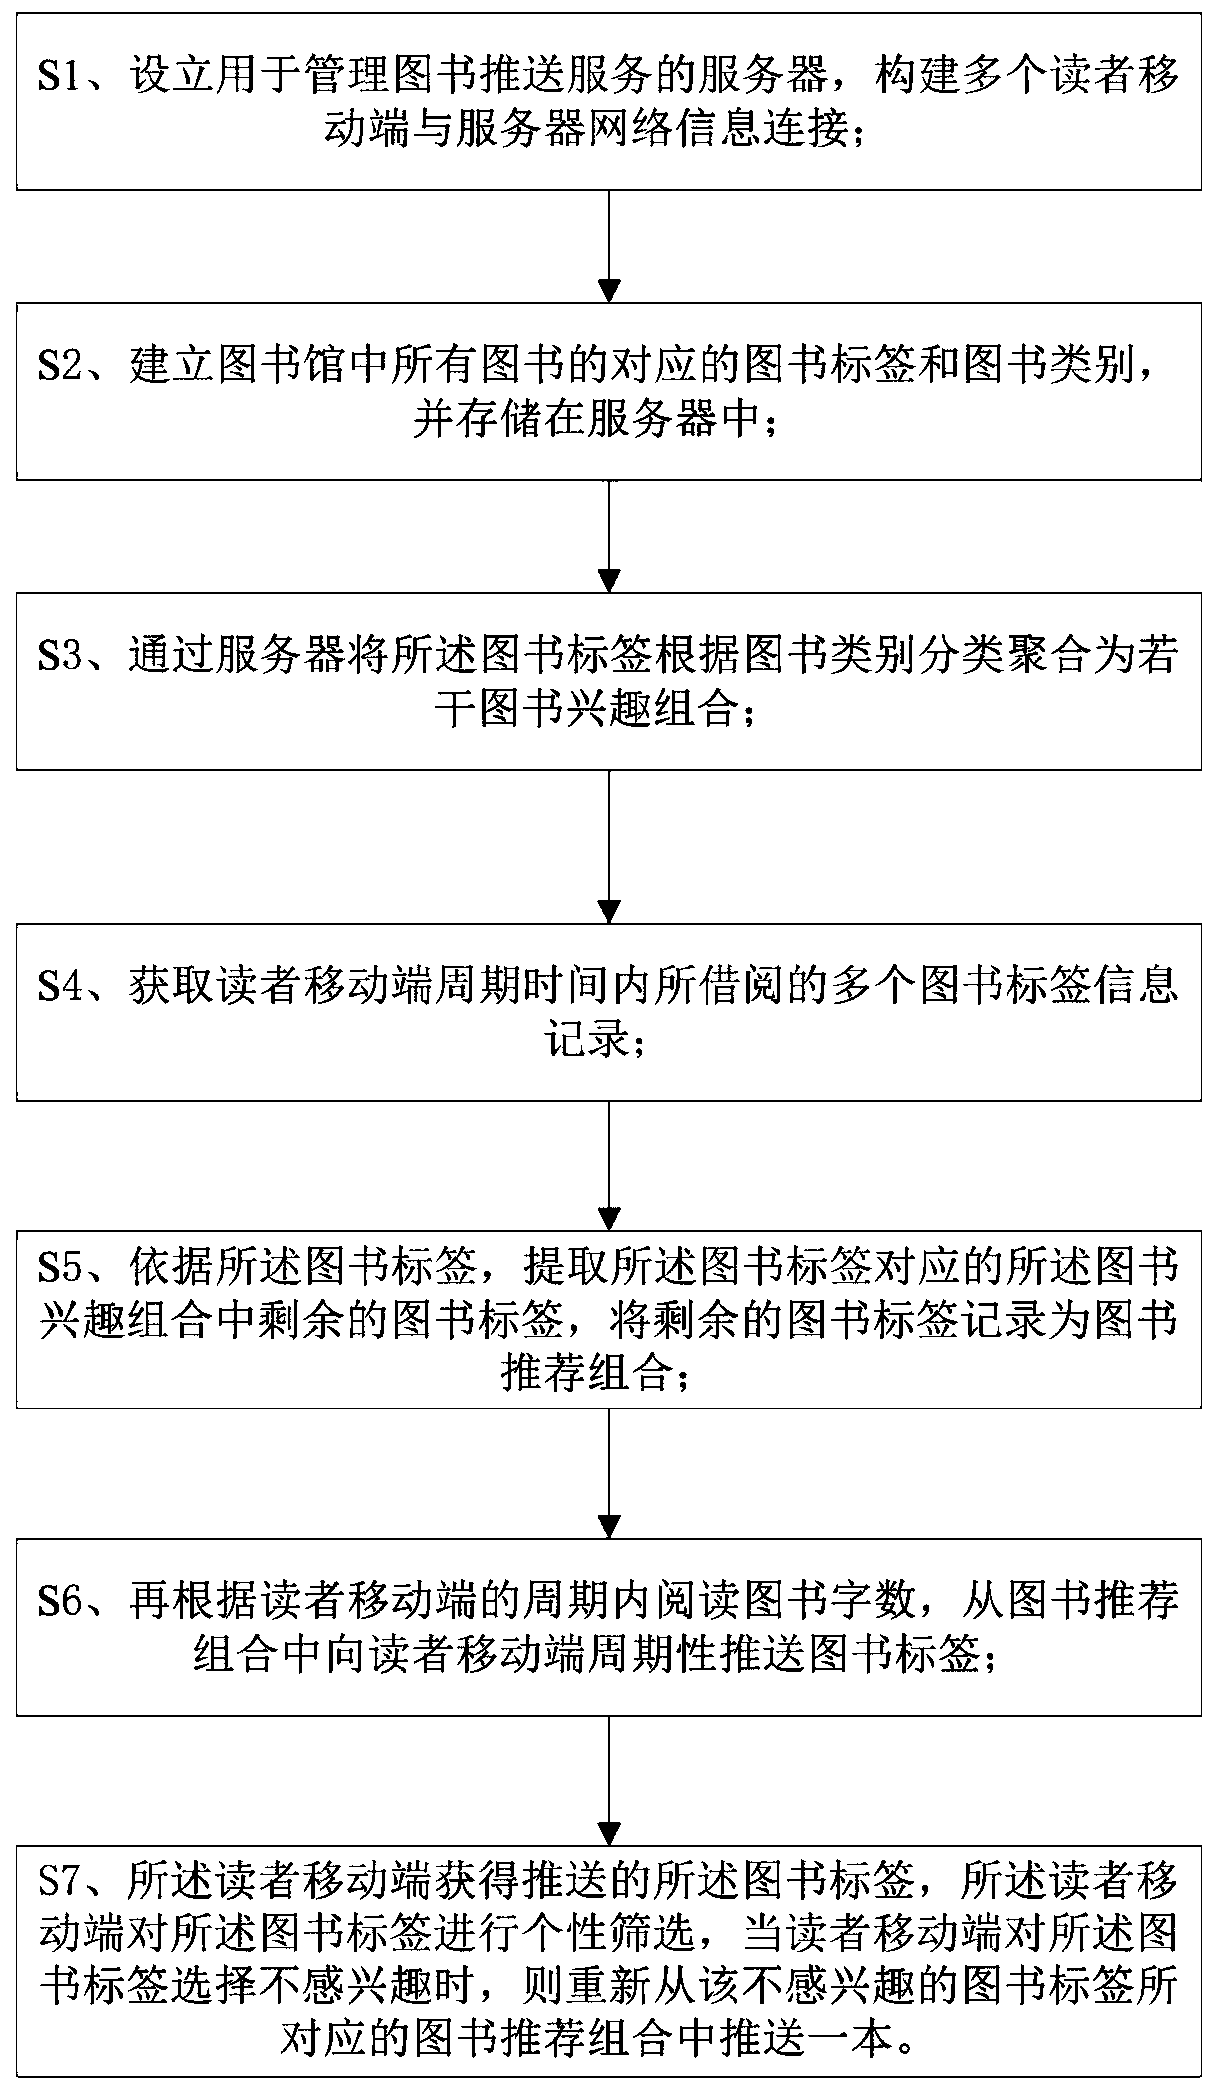 Intelligent campus library management method and system based on information processing